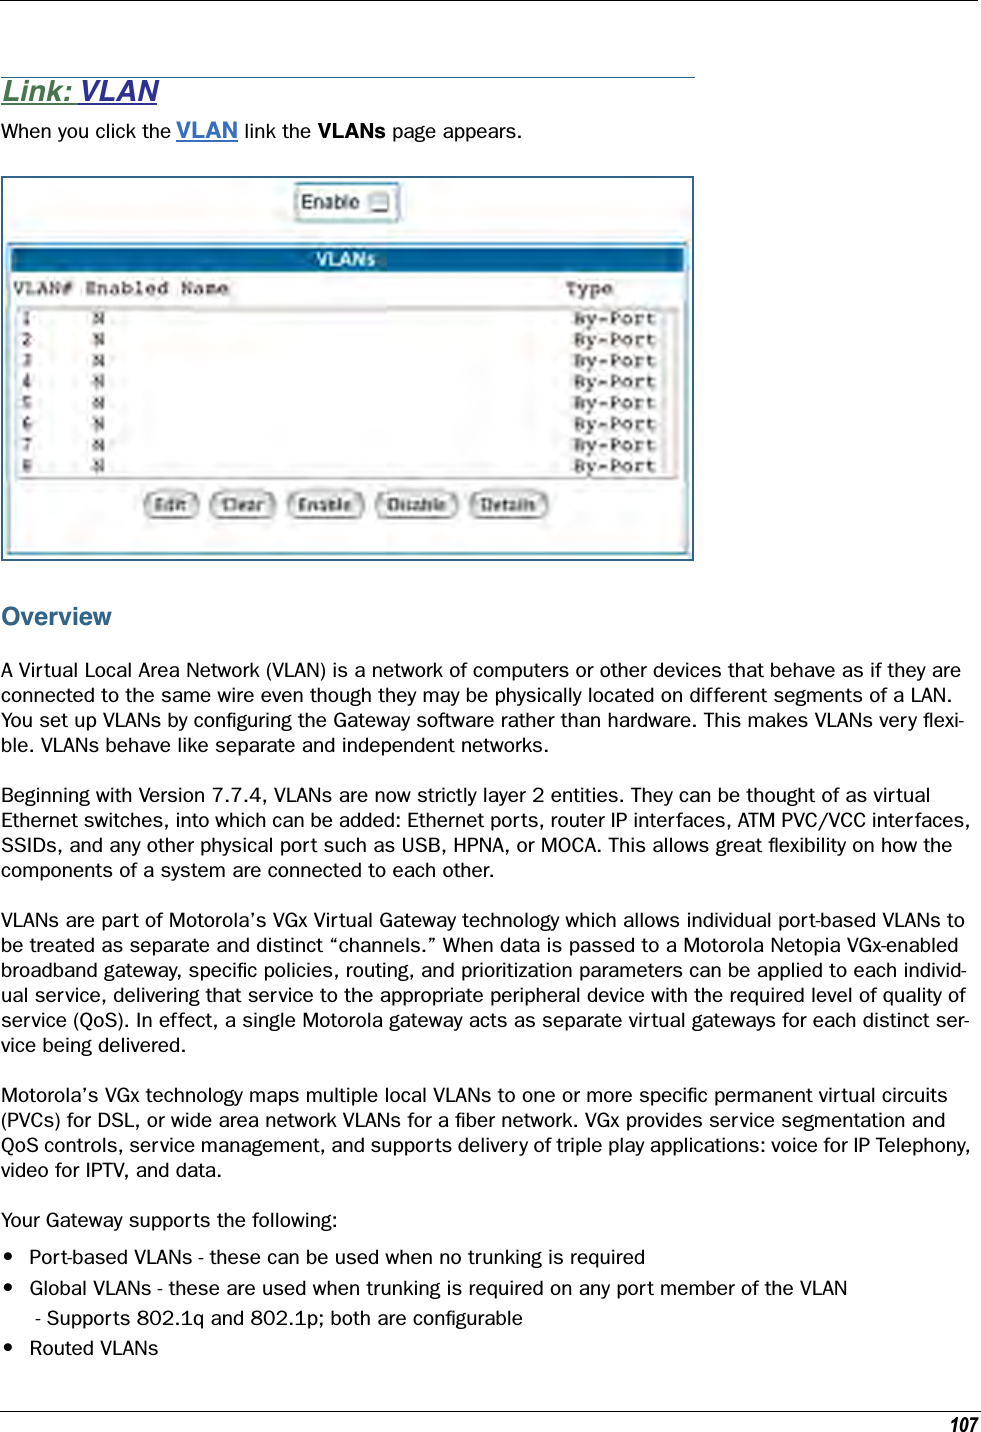 107Link: VLANWhen you click the VLAN link the VLANs page appears.OverviewA Virtual Local Area Network (VLAN) is a network of computers or other devices that behave as if they are connected to the same wire even though they may be physically located on different segments of a LAN. You set up VLANs by conﬁguring the Gateway software rather than hardware. This makes VLANs very ﬂexi-ble. VLANs behave like separate and independent networks.Beginning with Version 7.7.4, VLANs are now strictly layer 2 entities. They can be thought of as virtual Ethernet switches, into which can be added: Ethernet ports, router IP interfaces, ATM PVC/VCC interfaces, SSIDs, and any other physical port such as USB, HPNA, or MOCA. This allows great ﬂexibility on how the components of a system are connected to each other.VLANs are part of Motorola’s VGx Virtual Gateway technology which allows individual port-based VLANs to be treated as separate and distinct “channels.” When data is passed to a Motorola Netopia VGx-enabled broadband gateway, speciﬁc policies, routing, and prioritization parameters can be applied to each individ-ual service, delivering that service to the appropriate peripheral device with the required level of quality of service (QoS). In effect, a single Motorola gateway acts as separate virtual gateways for each distinct ser-vice being delivered.Motorola’s VGx technology maps multiple local VLANs to one or more speciﬁc permanent virtual circuits (PVCs) for DSL, or wide area network VLANs for a ﬁber network. VGx provides service segmentation and QoS controls, service management, and supports delivery of triple play applications: voice for IP Telephony, video for IPTV, and data.Your Gateway supports the following:•Port-based VLANs - these can be used when no trunking is required •Global VLANs - these are used when trunking is required on any port member of the VLAN  - Supports 802.1q and 802.1p; both are conﬁgurable •Routed VLANs 